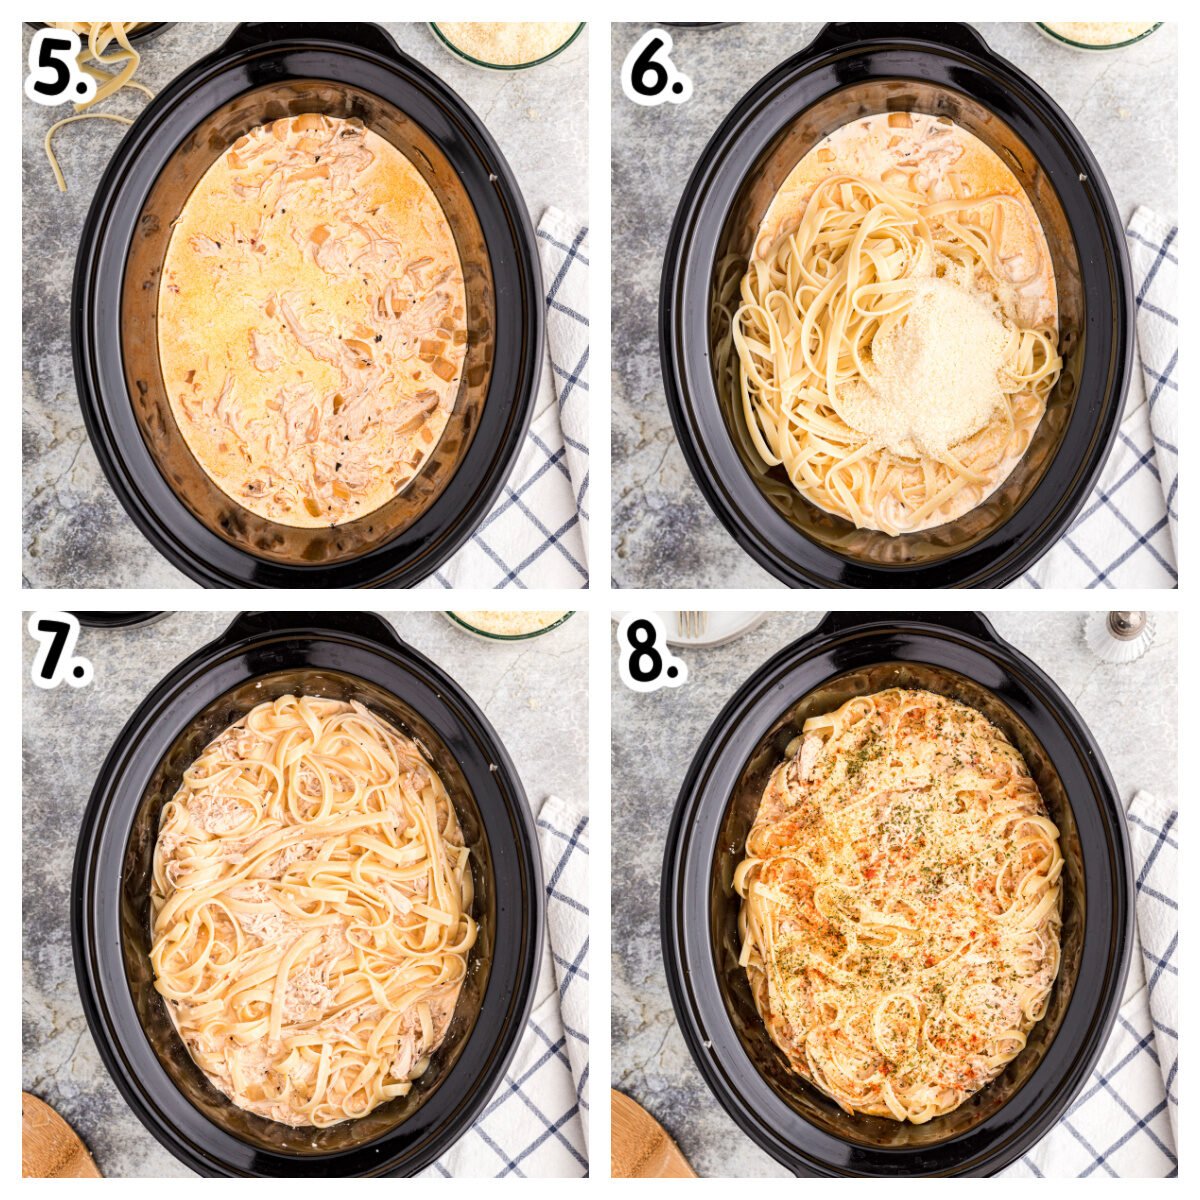 How to add cream, noodles and parmesan to chicken in slow cooker.